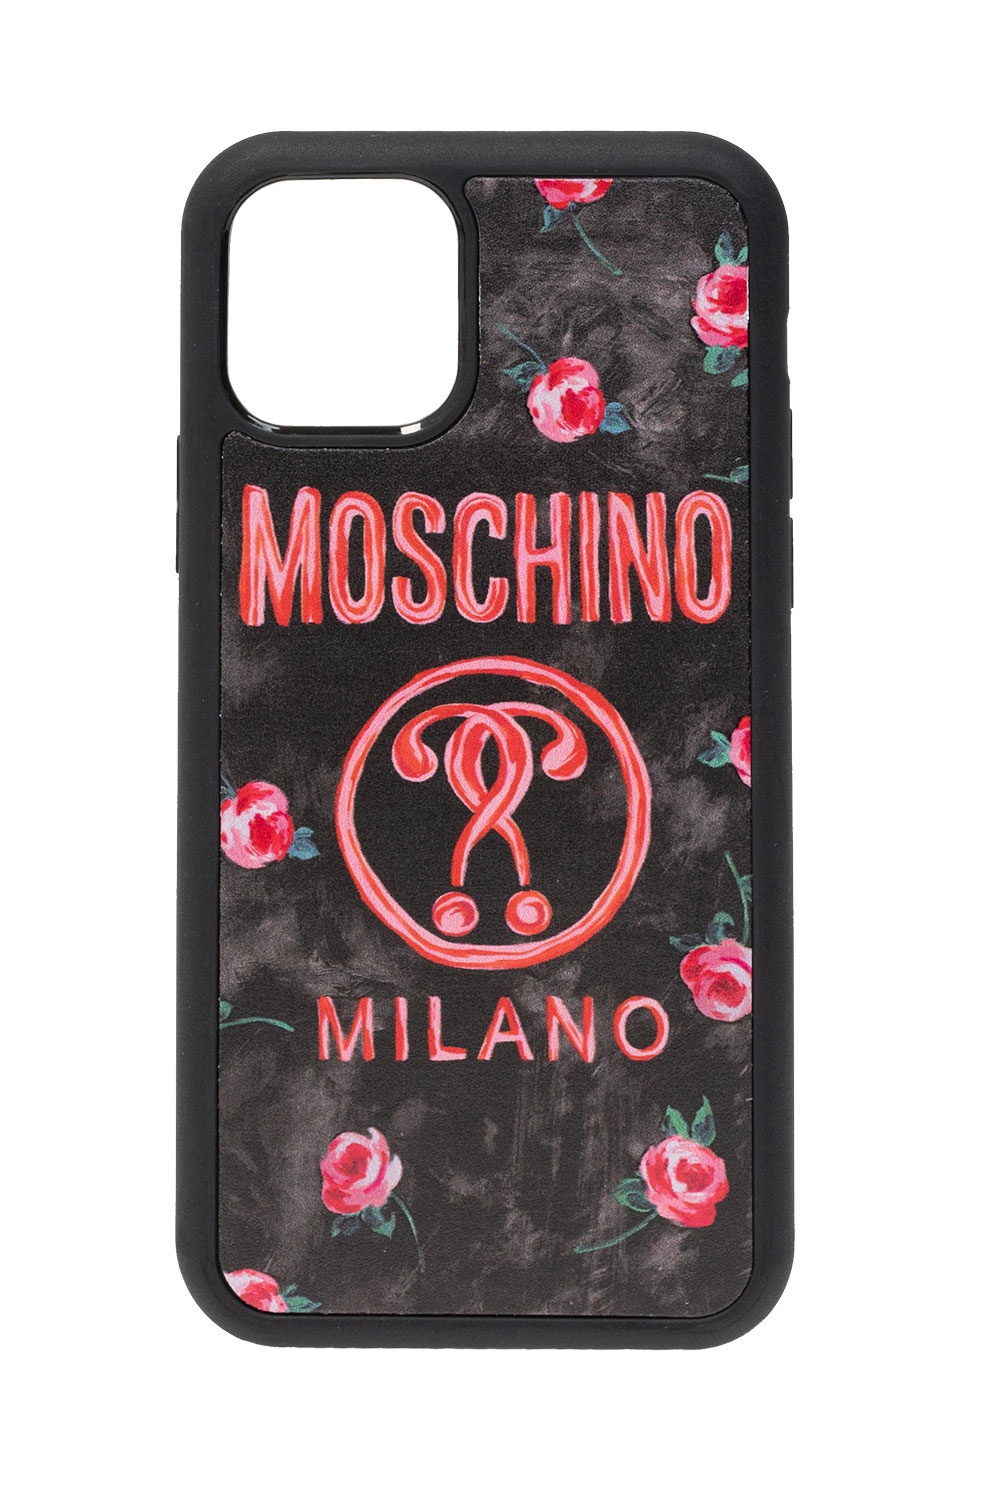 If The Table Does Not Fit On Your Screen You Can Scroll To The Right Moschino Gov Us